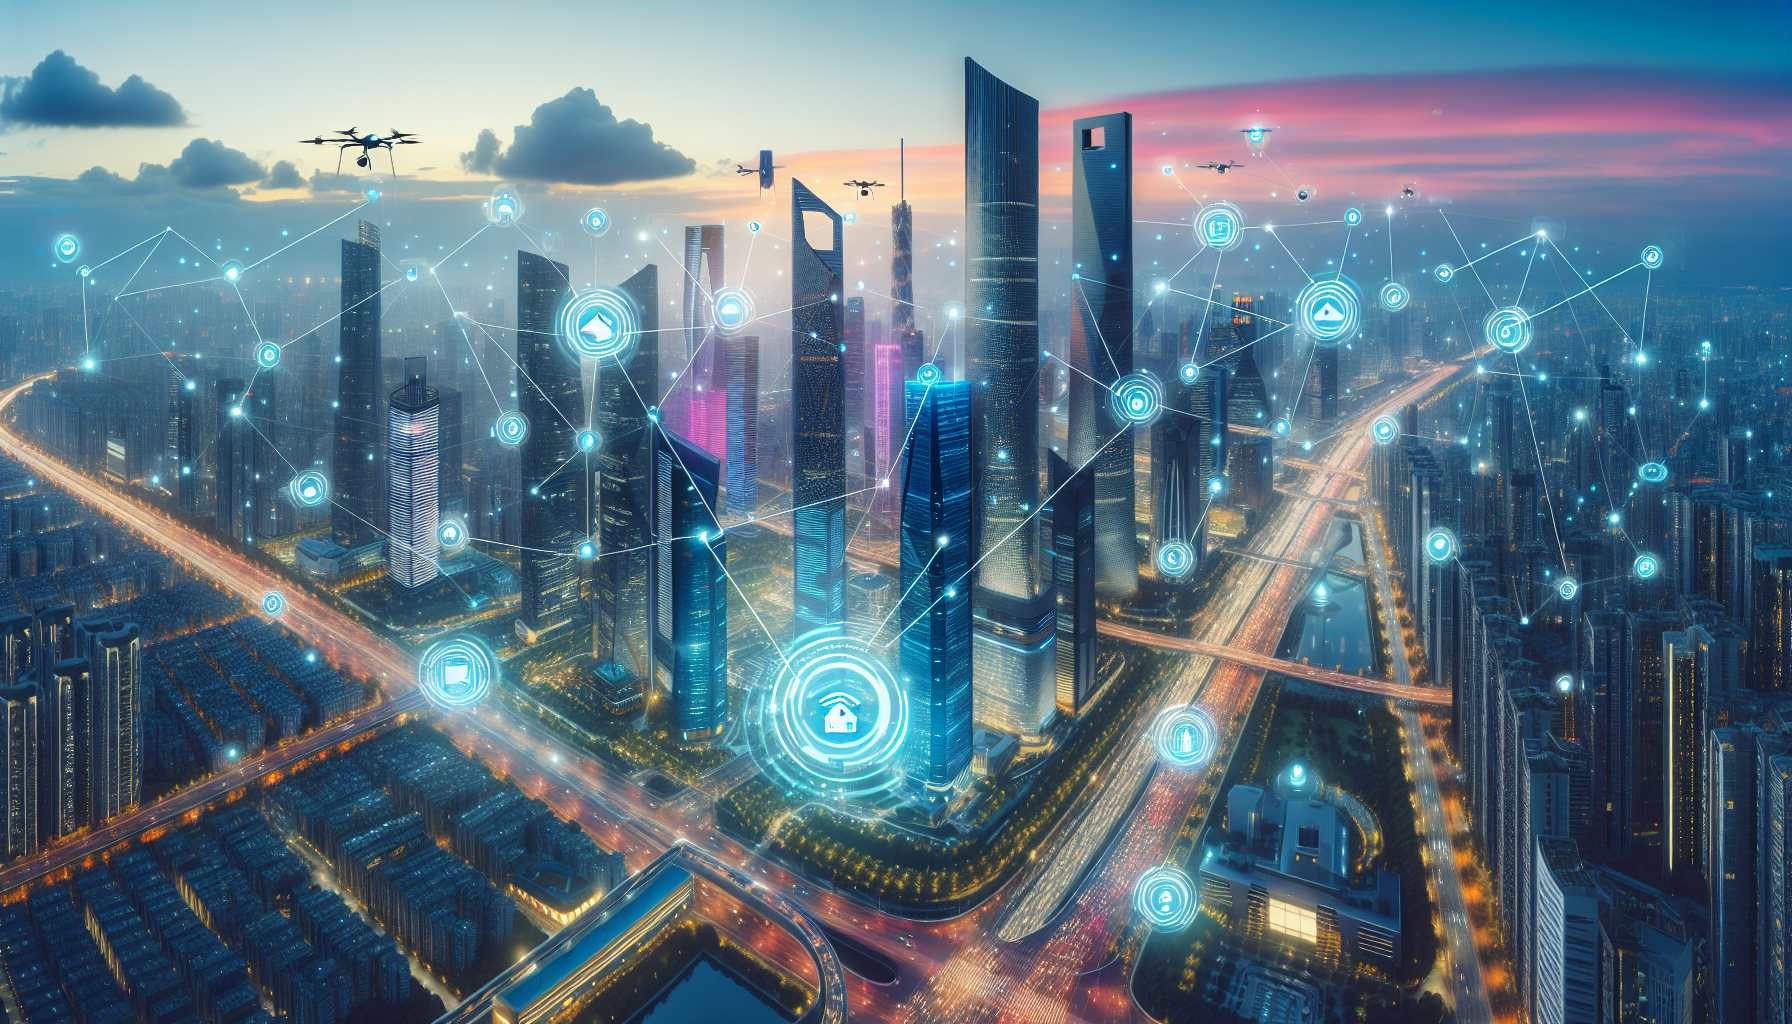 Smart city skyline with interconnected IoT devices